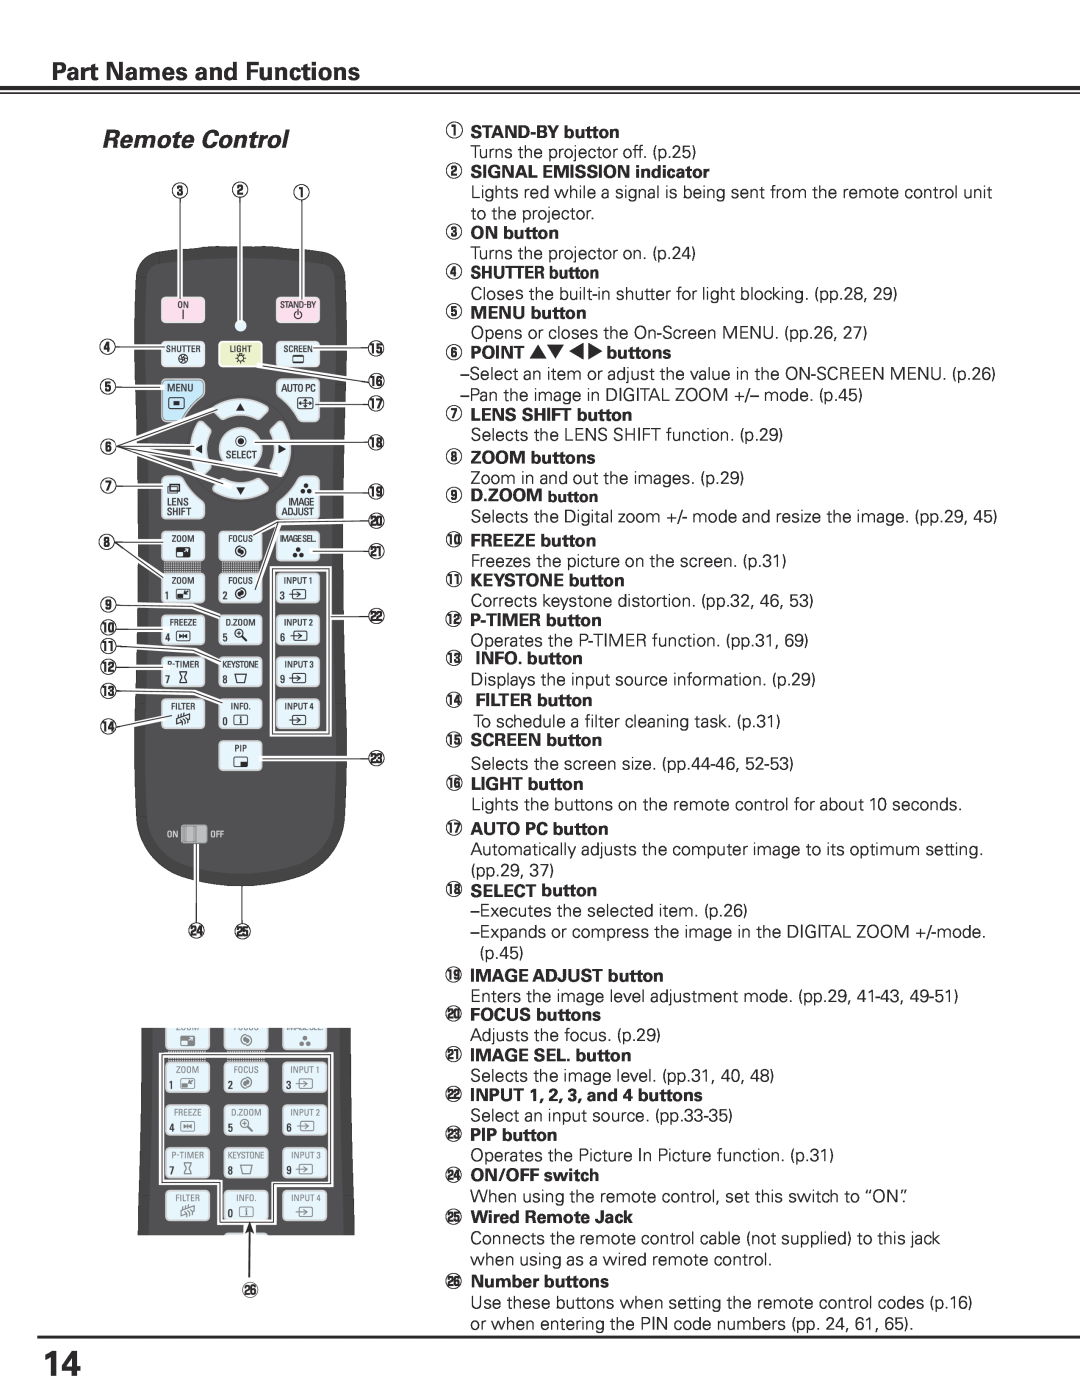 Sanyo HF15000L Remote Control, Part Names and Functions, q STAND-BYbutton, w SIGNAL EMISSION indicator, e ON button 